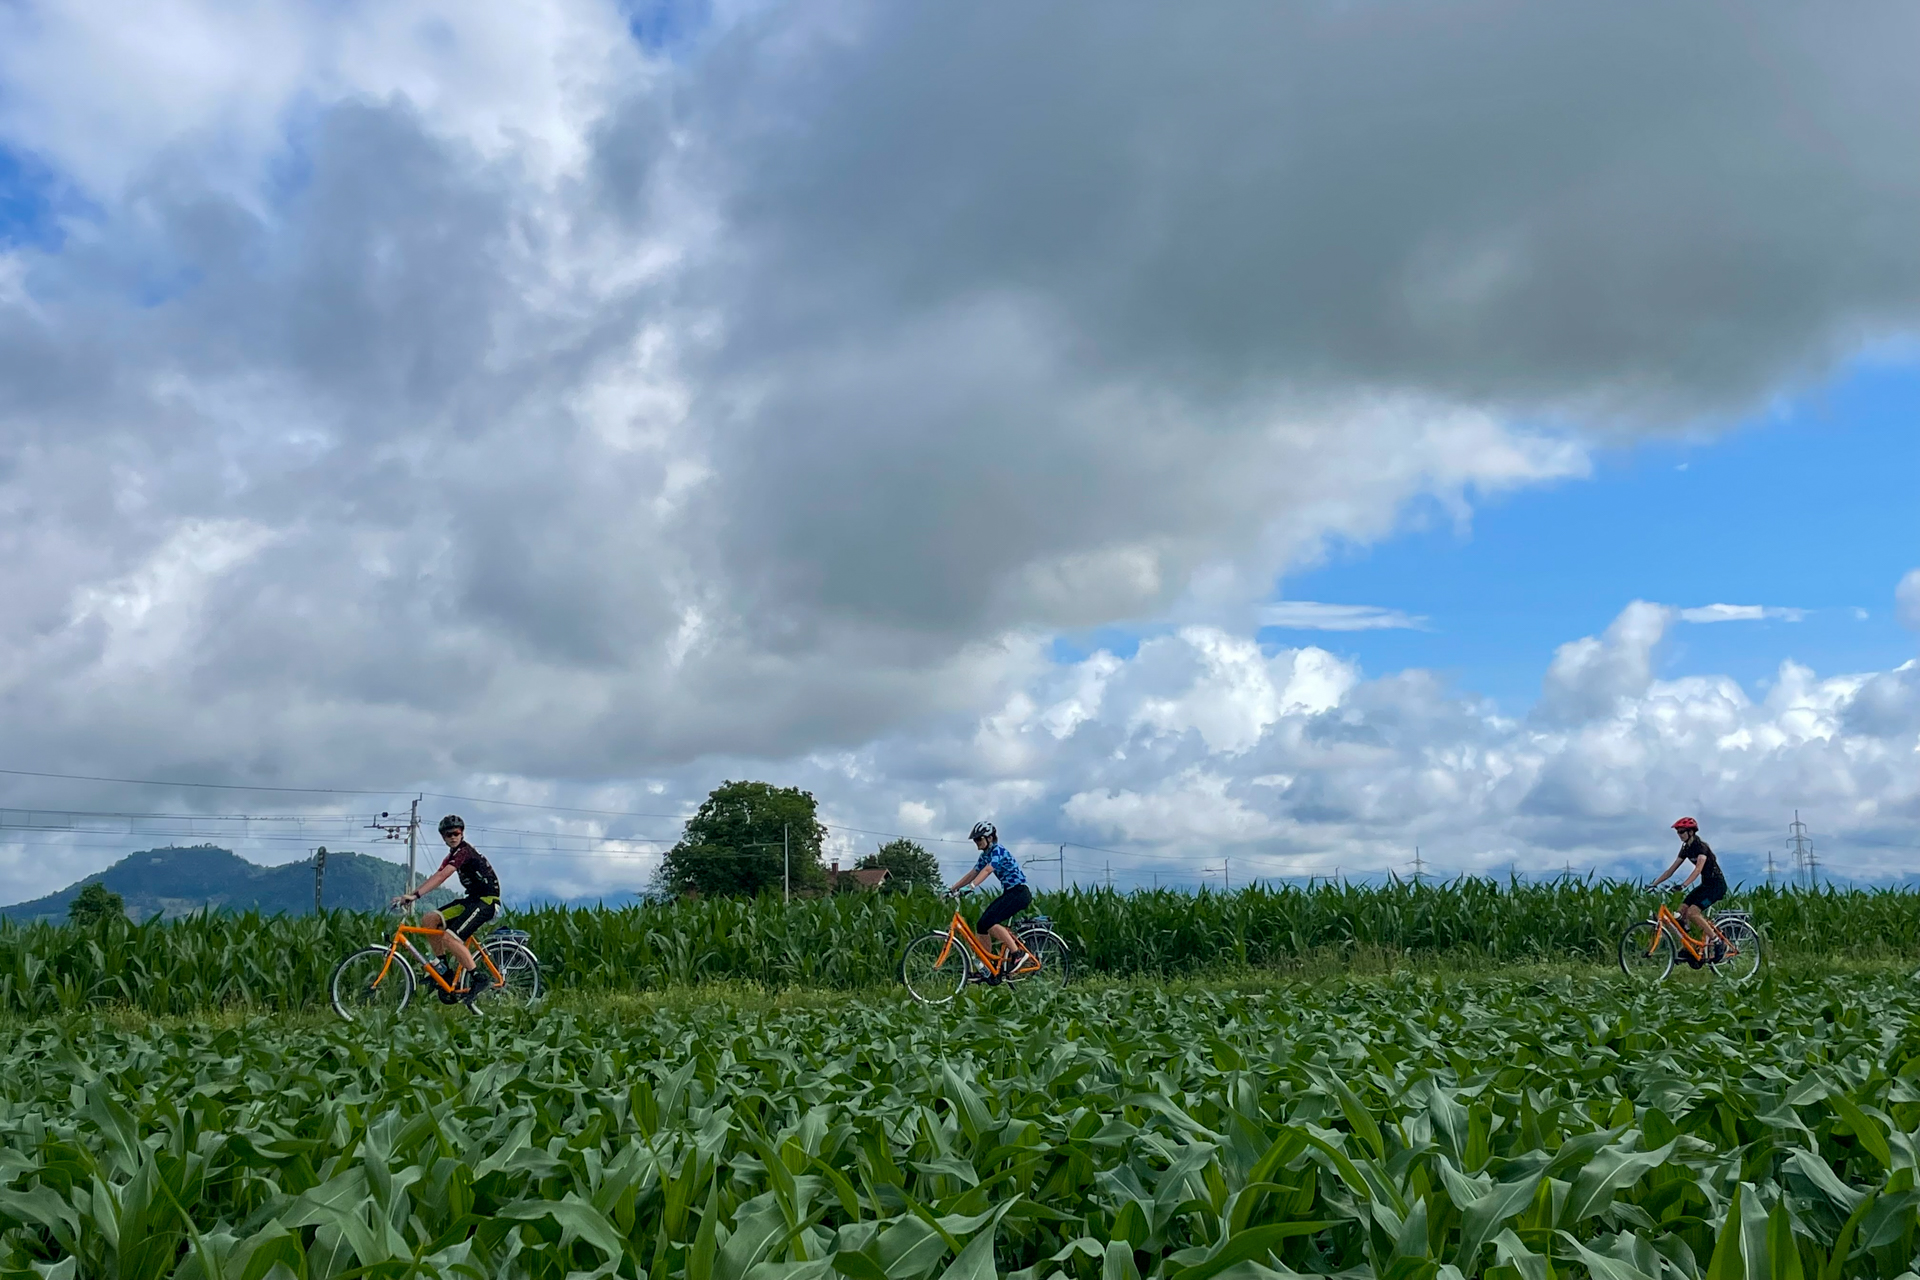 Three cyclists ride along a road with corn in the foreground and a moody sky in the background.